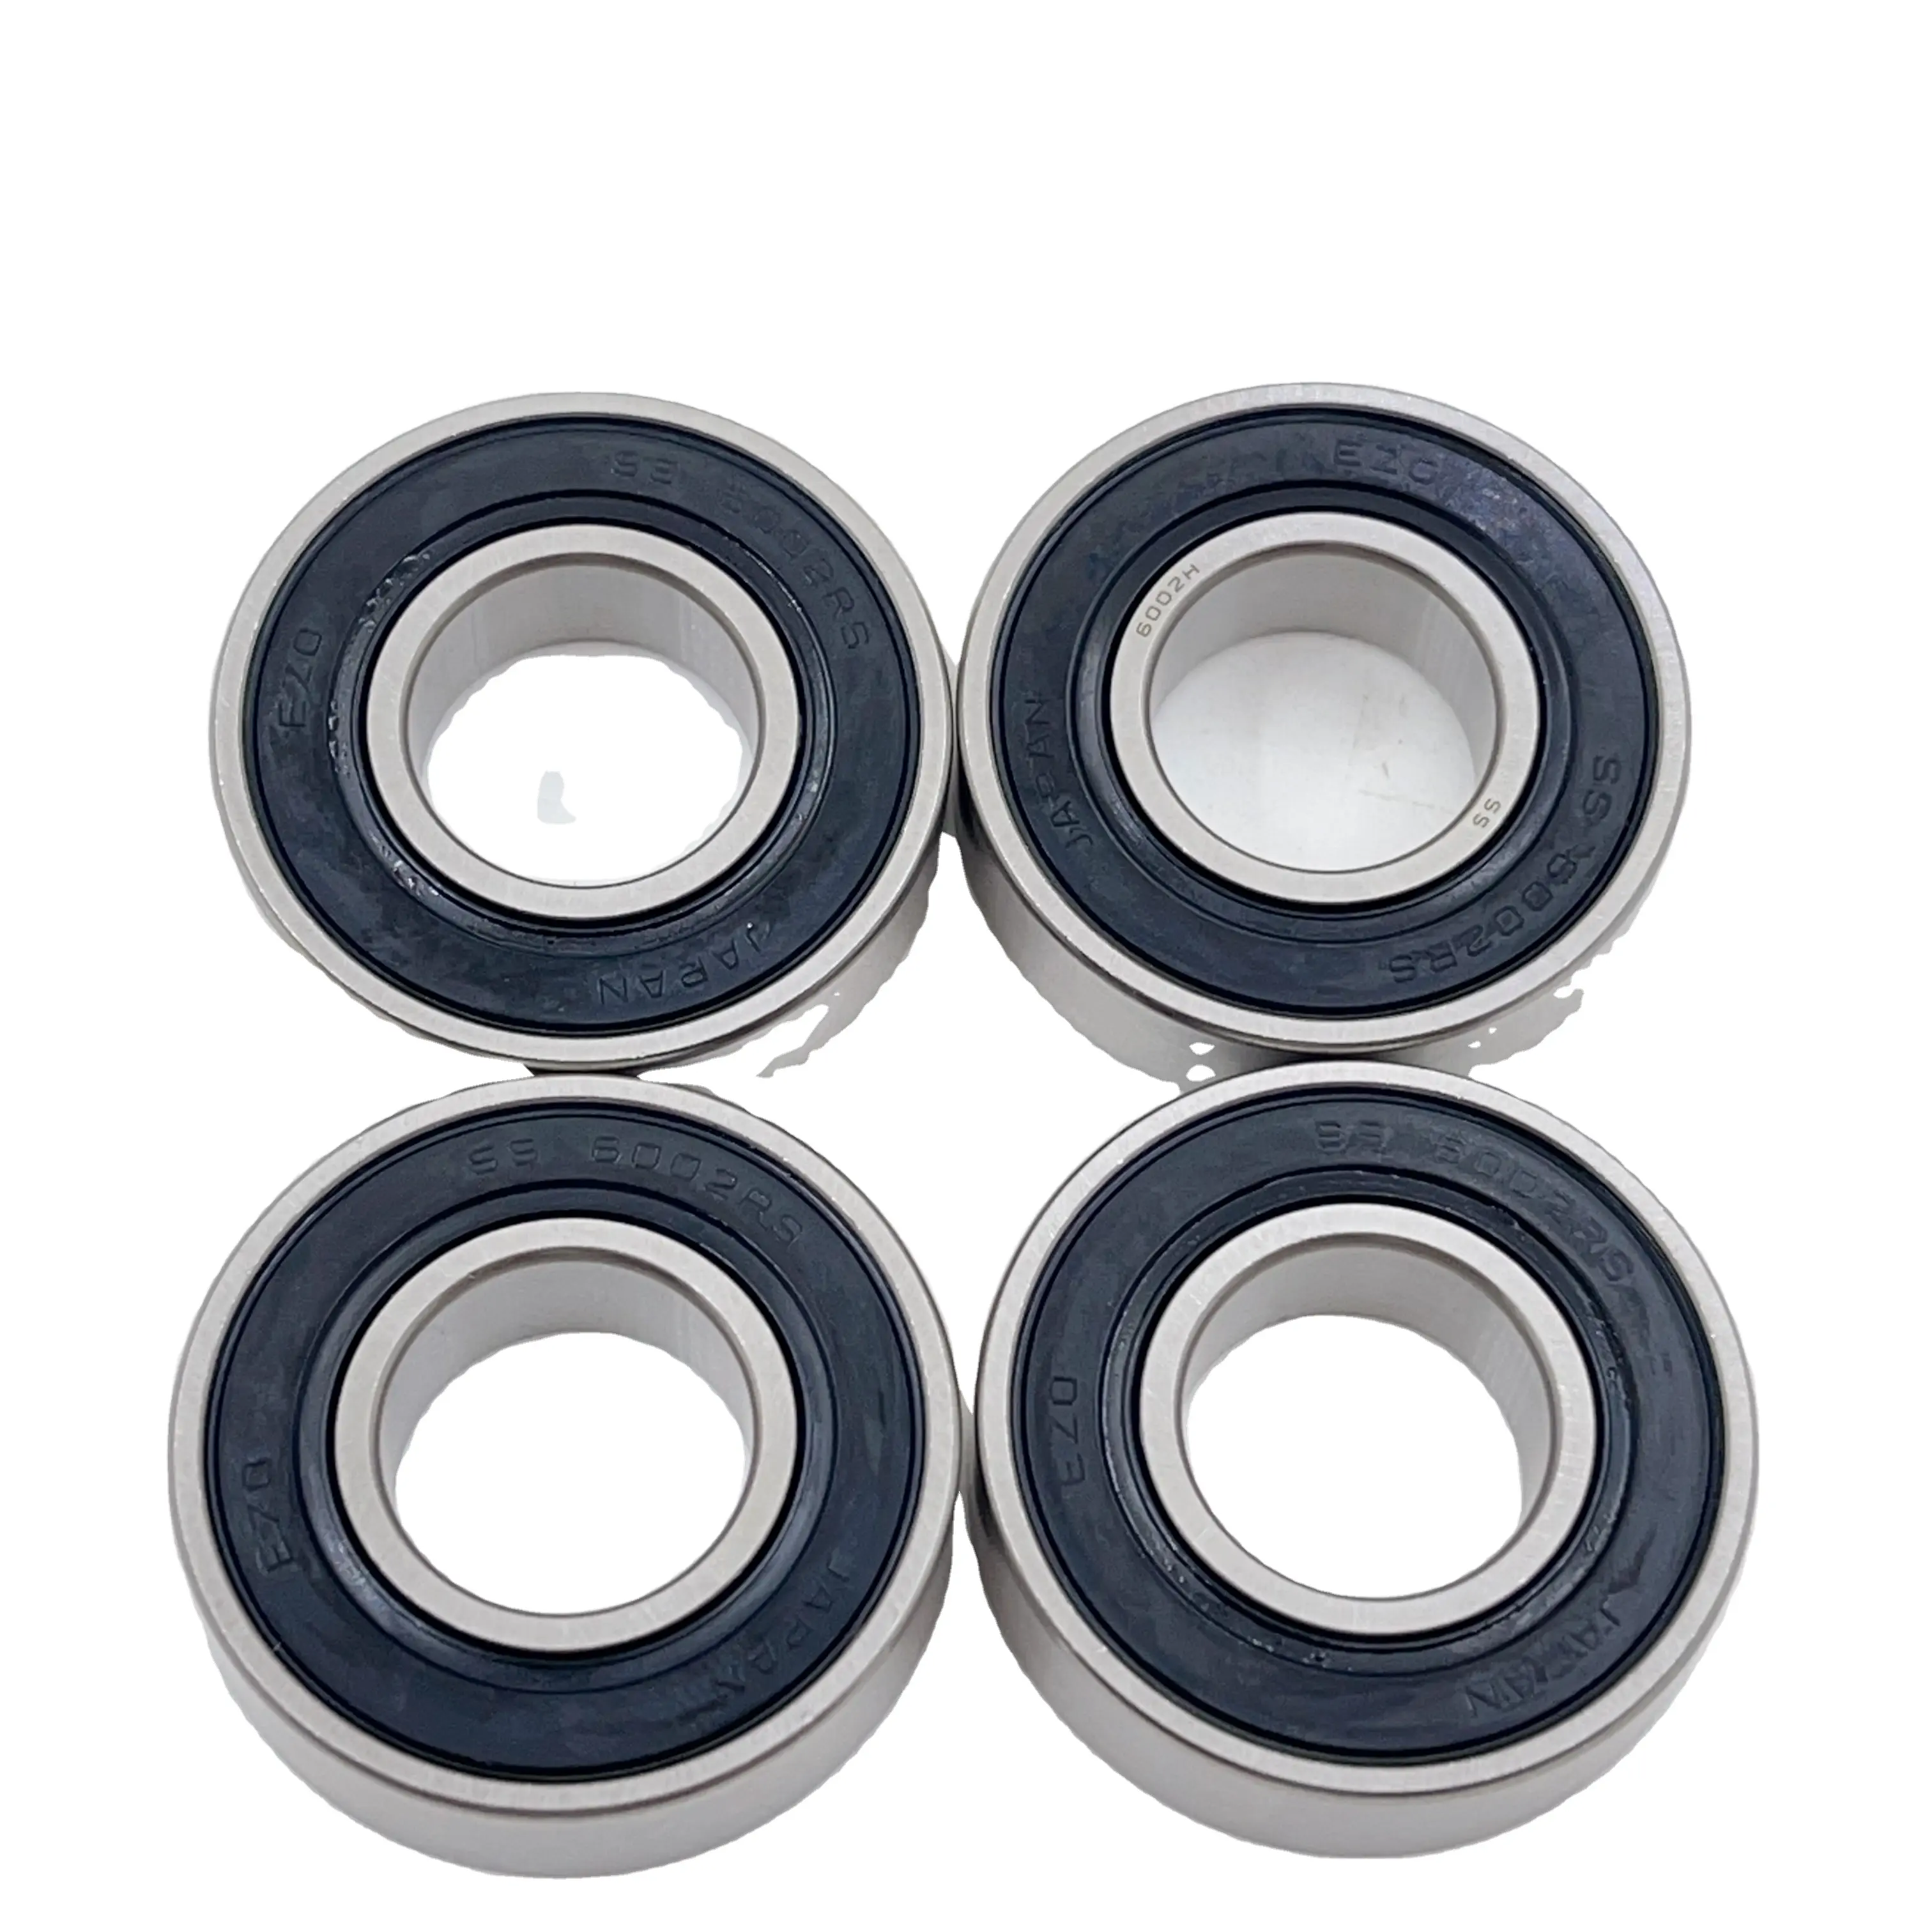 High Speed SS6002RS Rubber Sealed Stainless Steel Ball Bearing